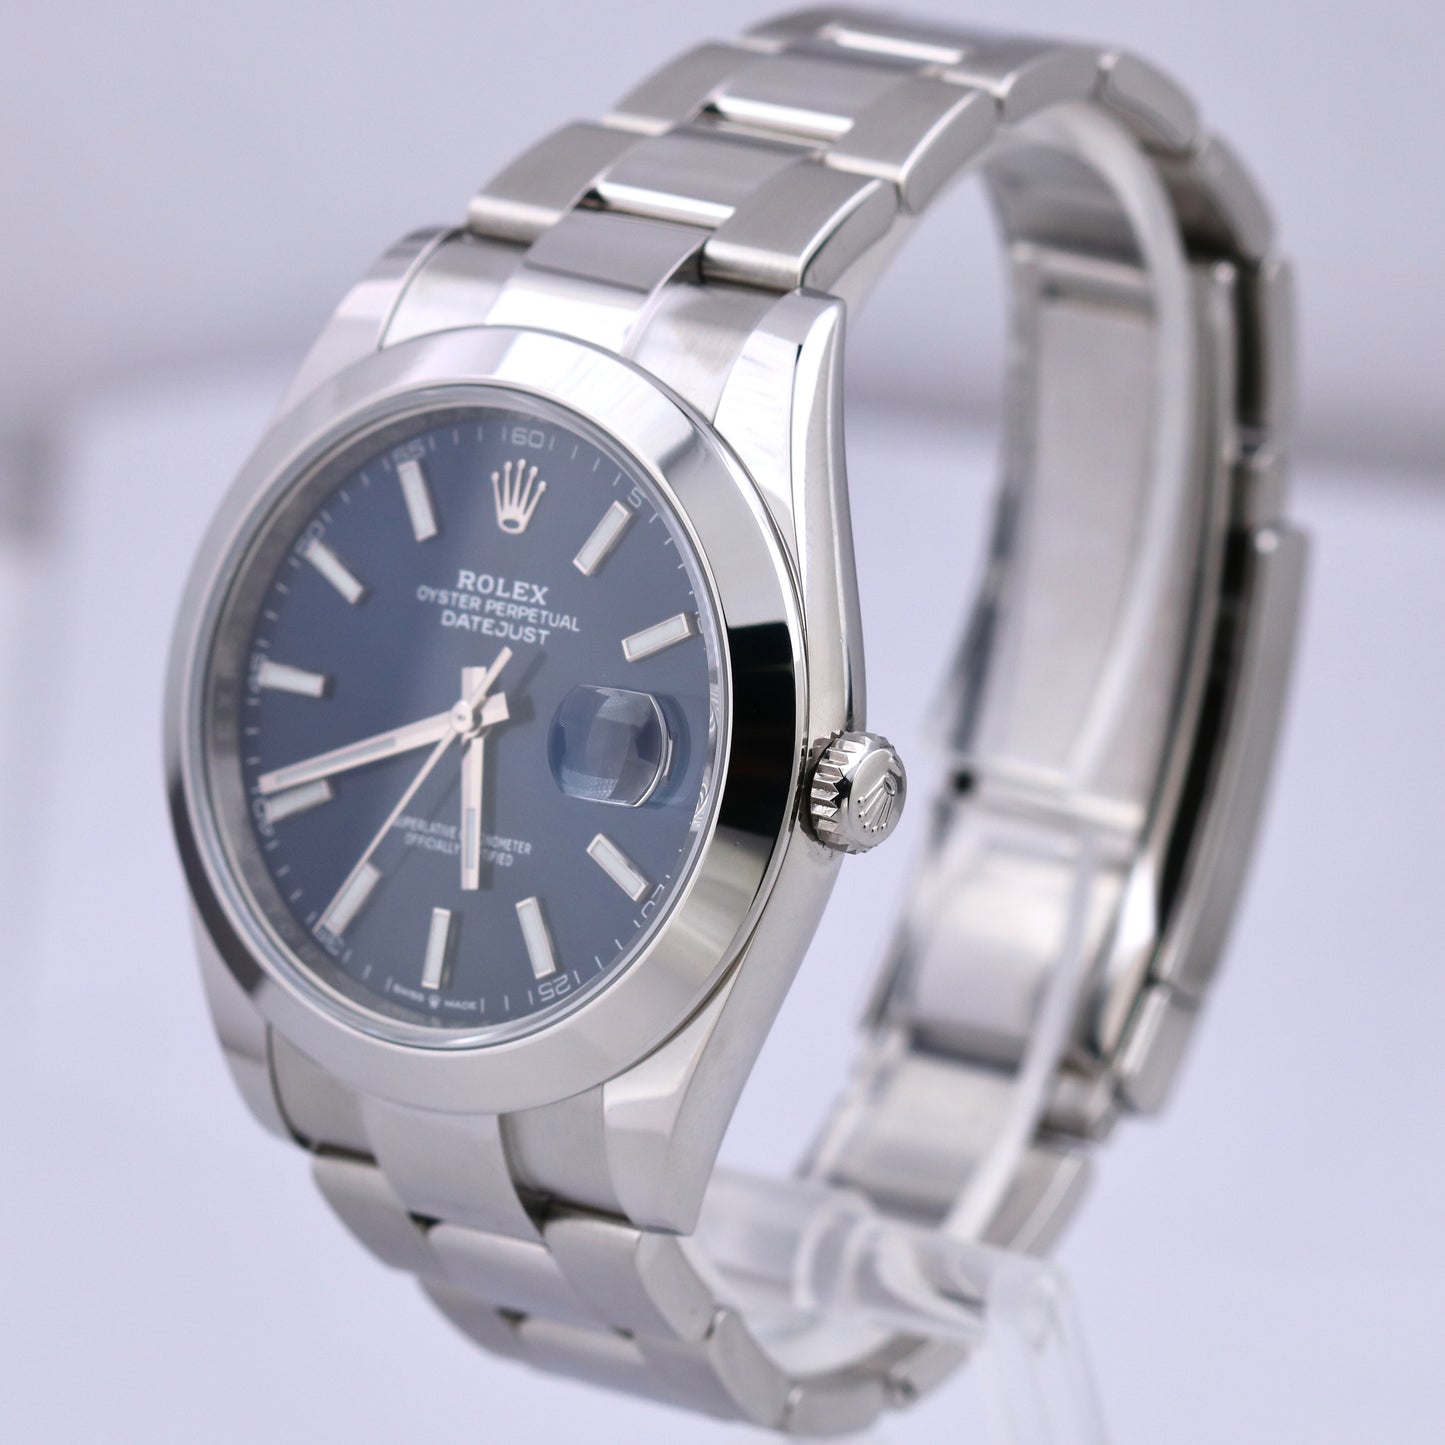 Rolex DateJust 41 BLUE Stainless Steel Smooth Oyster 41mm Date Watch 126300